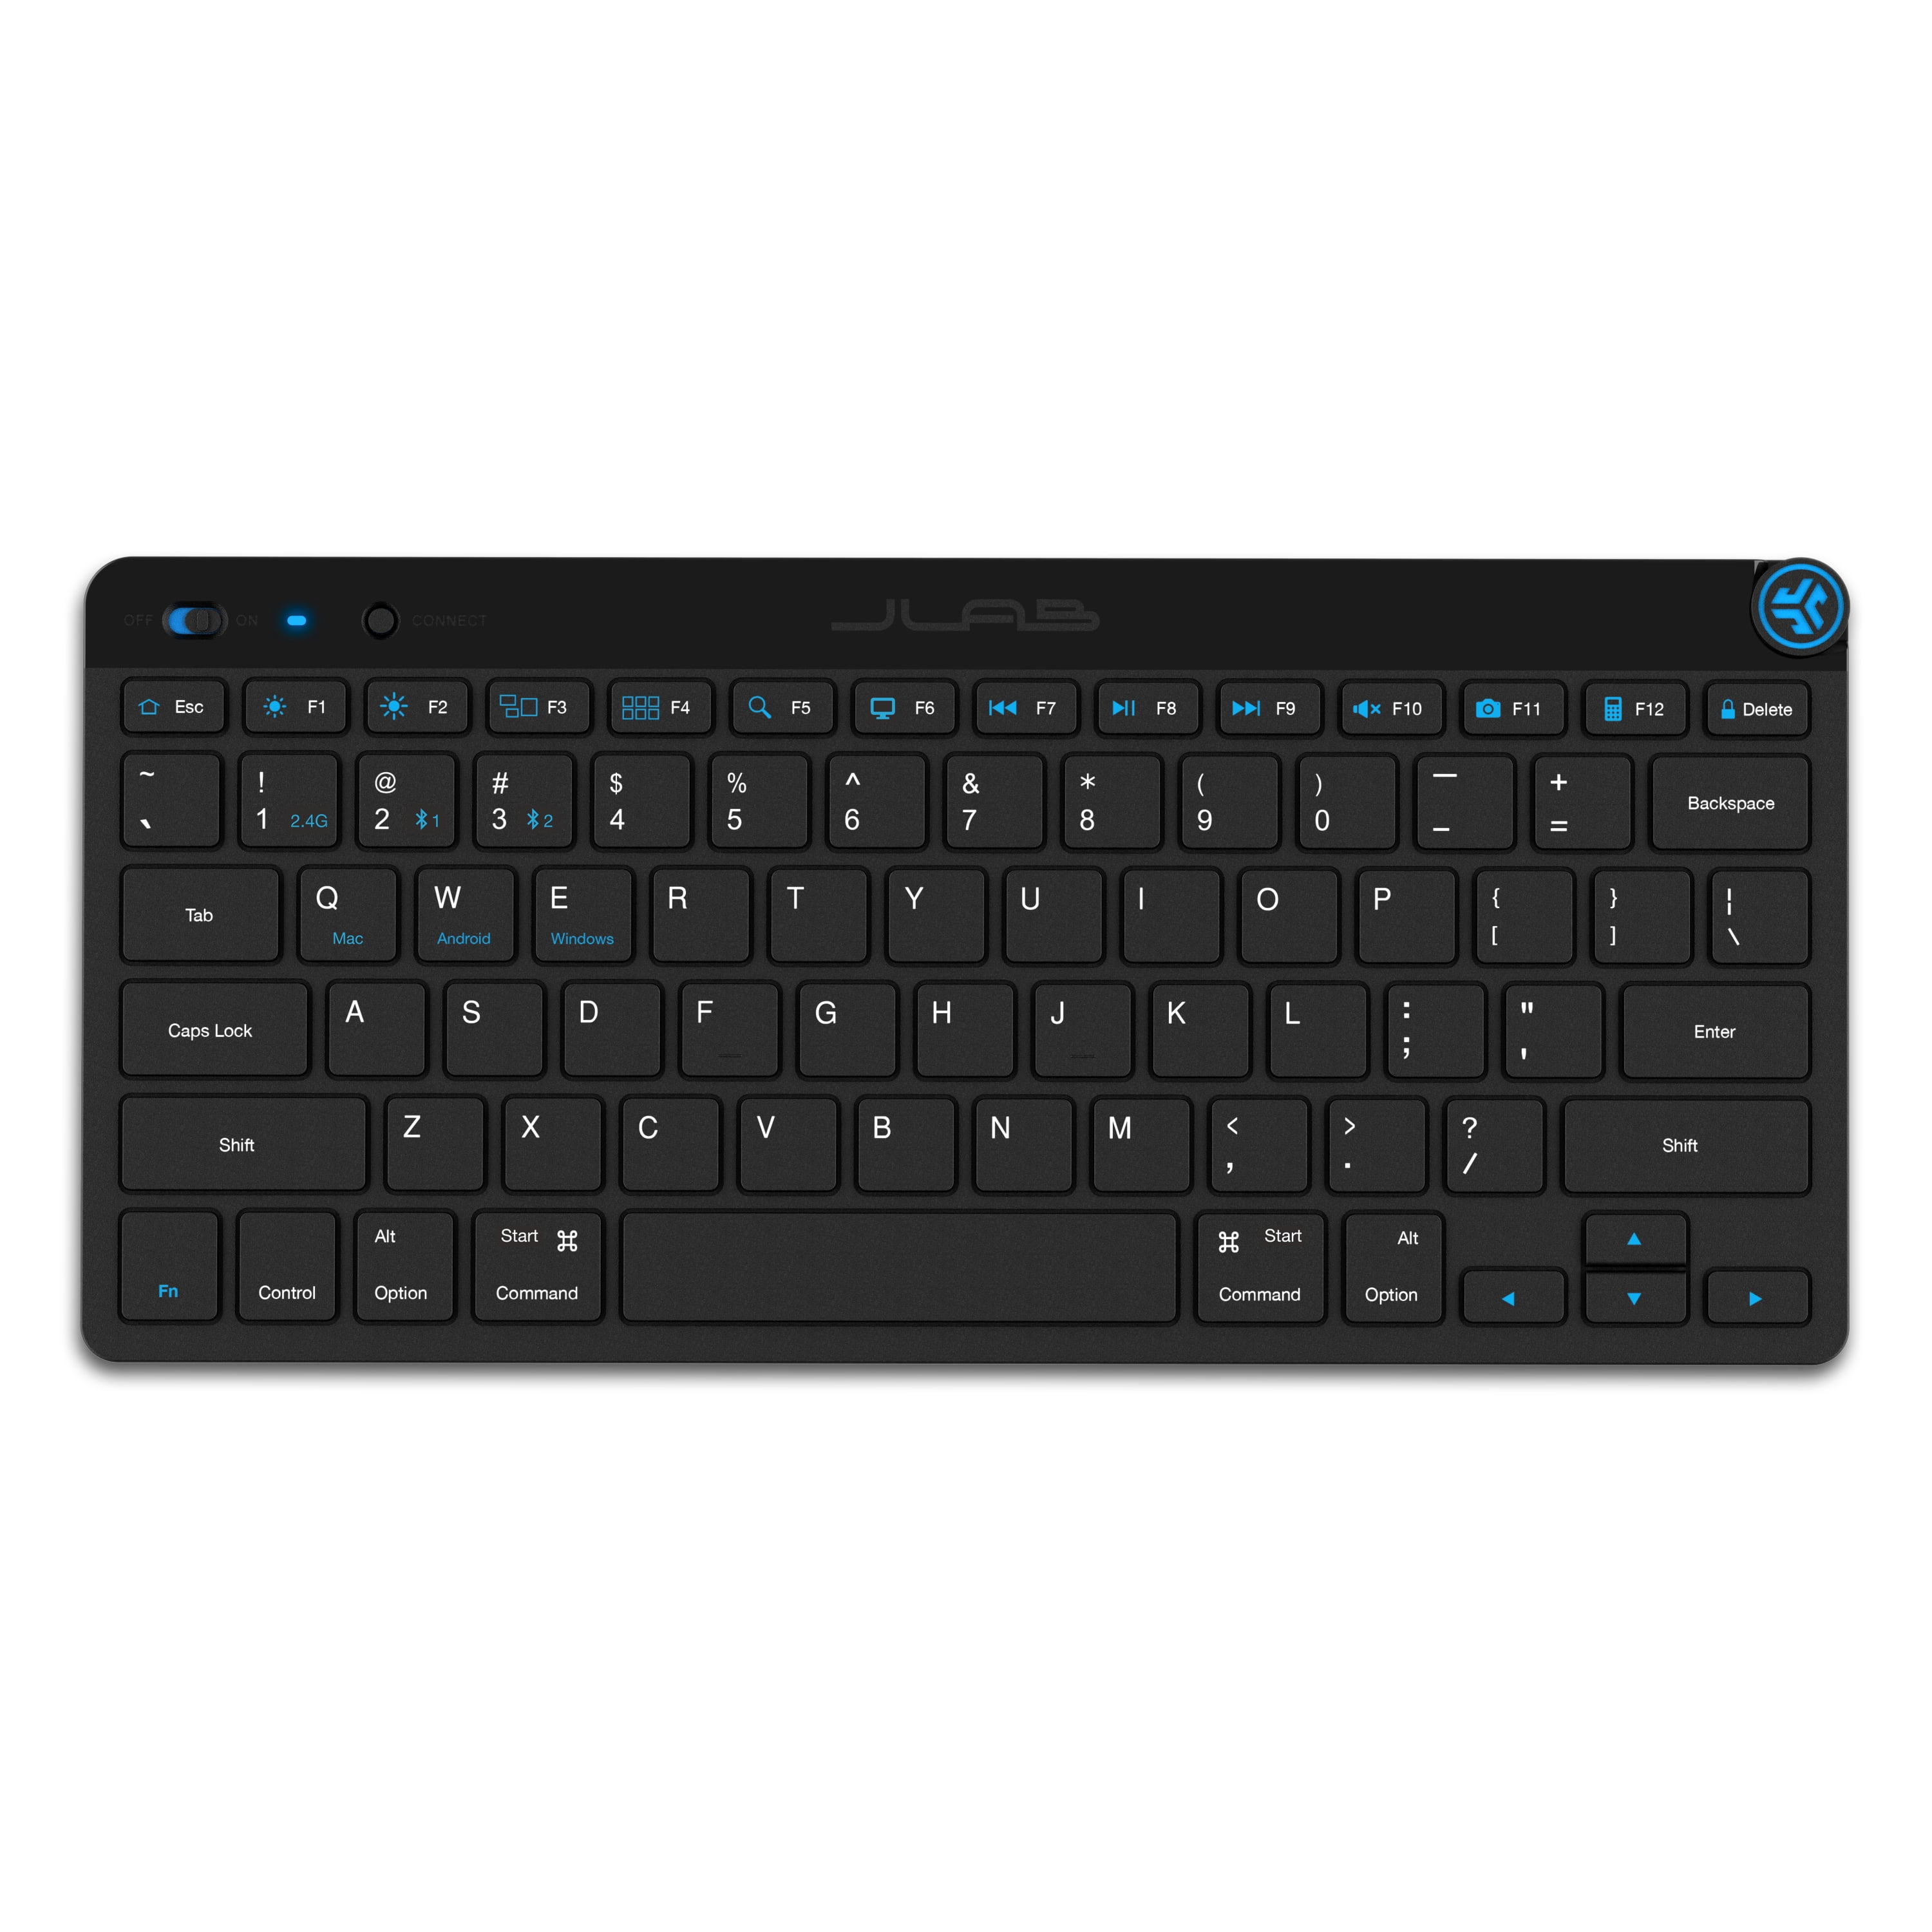 JLab GO Wireless Keyboard for Windows | Mac | iOS | Android | Chrome, 2.4 GHz Wireless, Bluetooth 5.0,Connect up to 3 Devices, Multi-Media Knob, Designed for PCs, Laptops, Tablets and Smart Phones